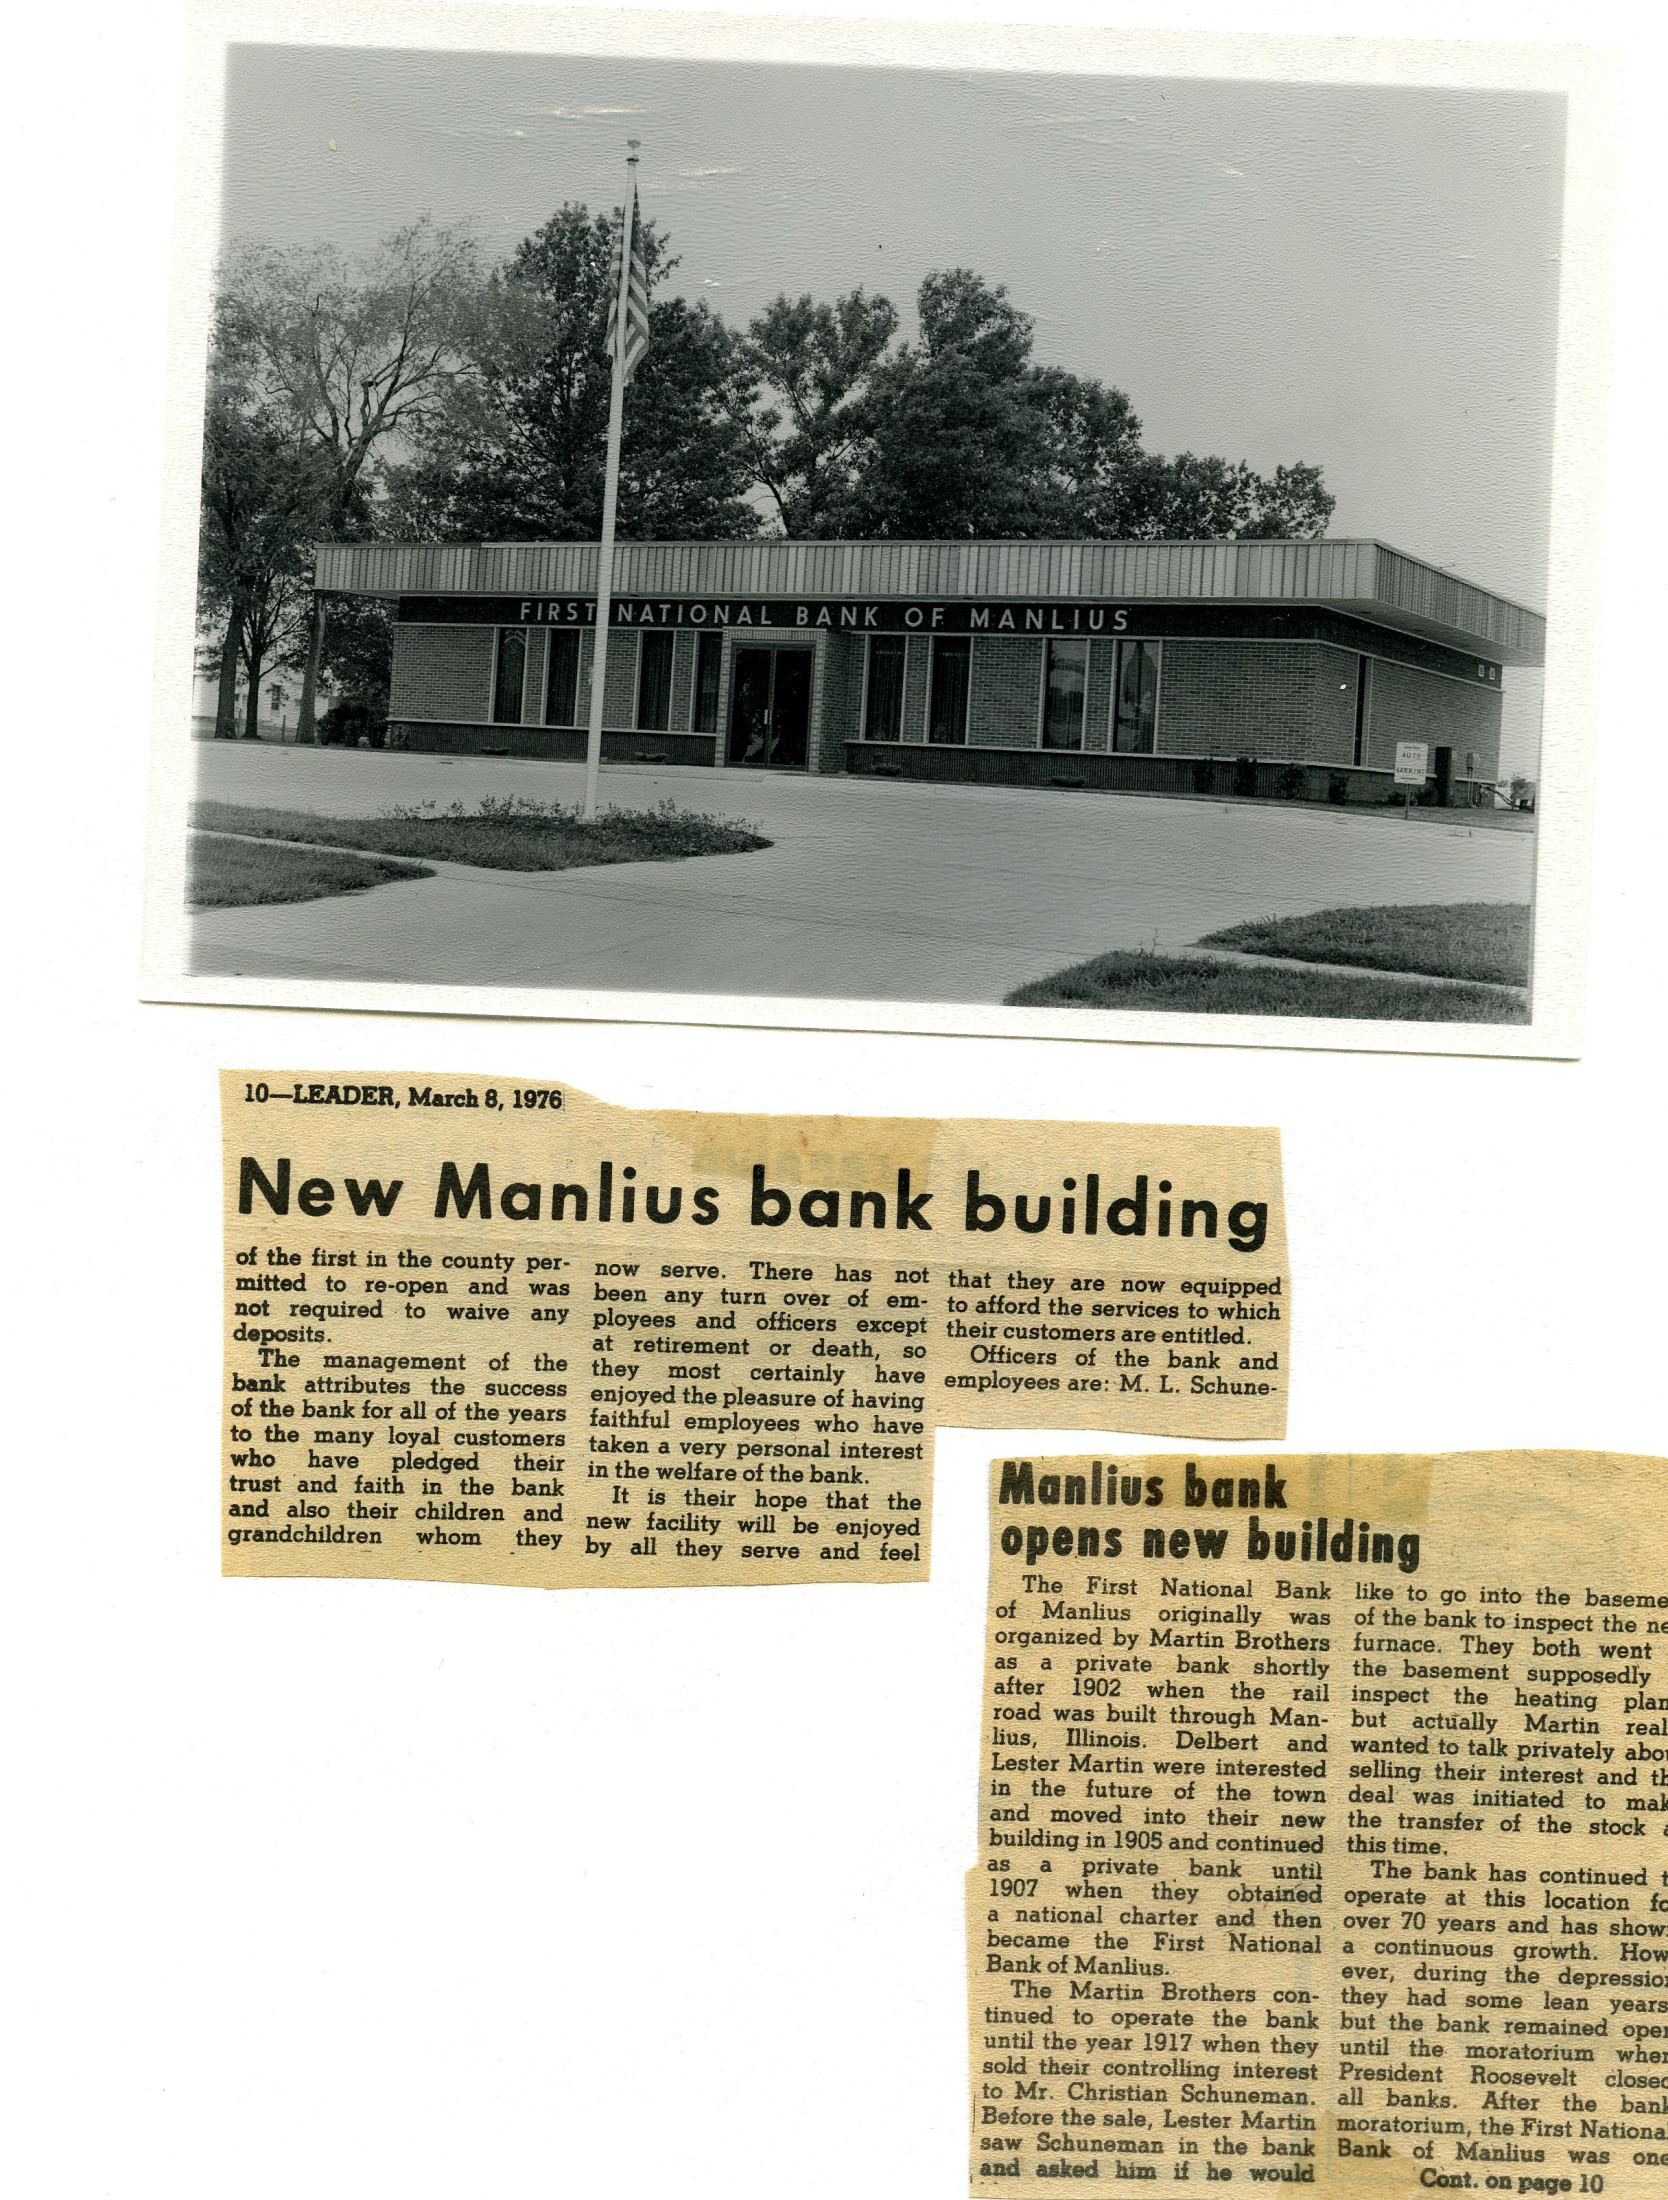 Album 12 FIRST NATIONAL BANK AND MANLIUS BANK Page 22